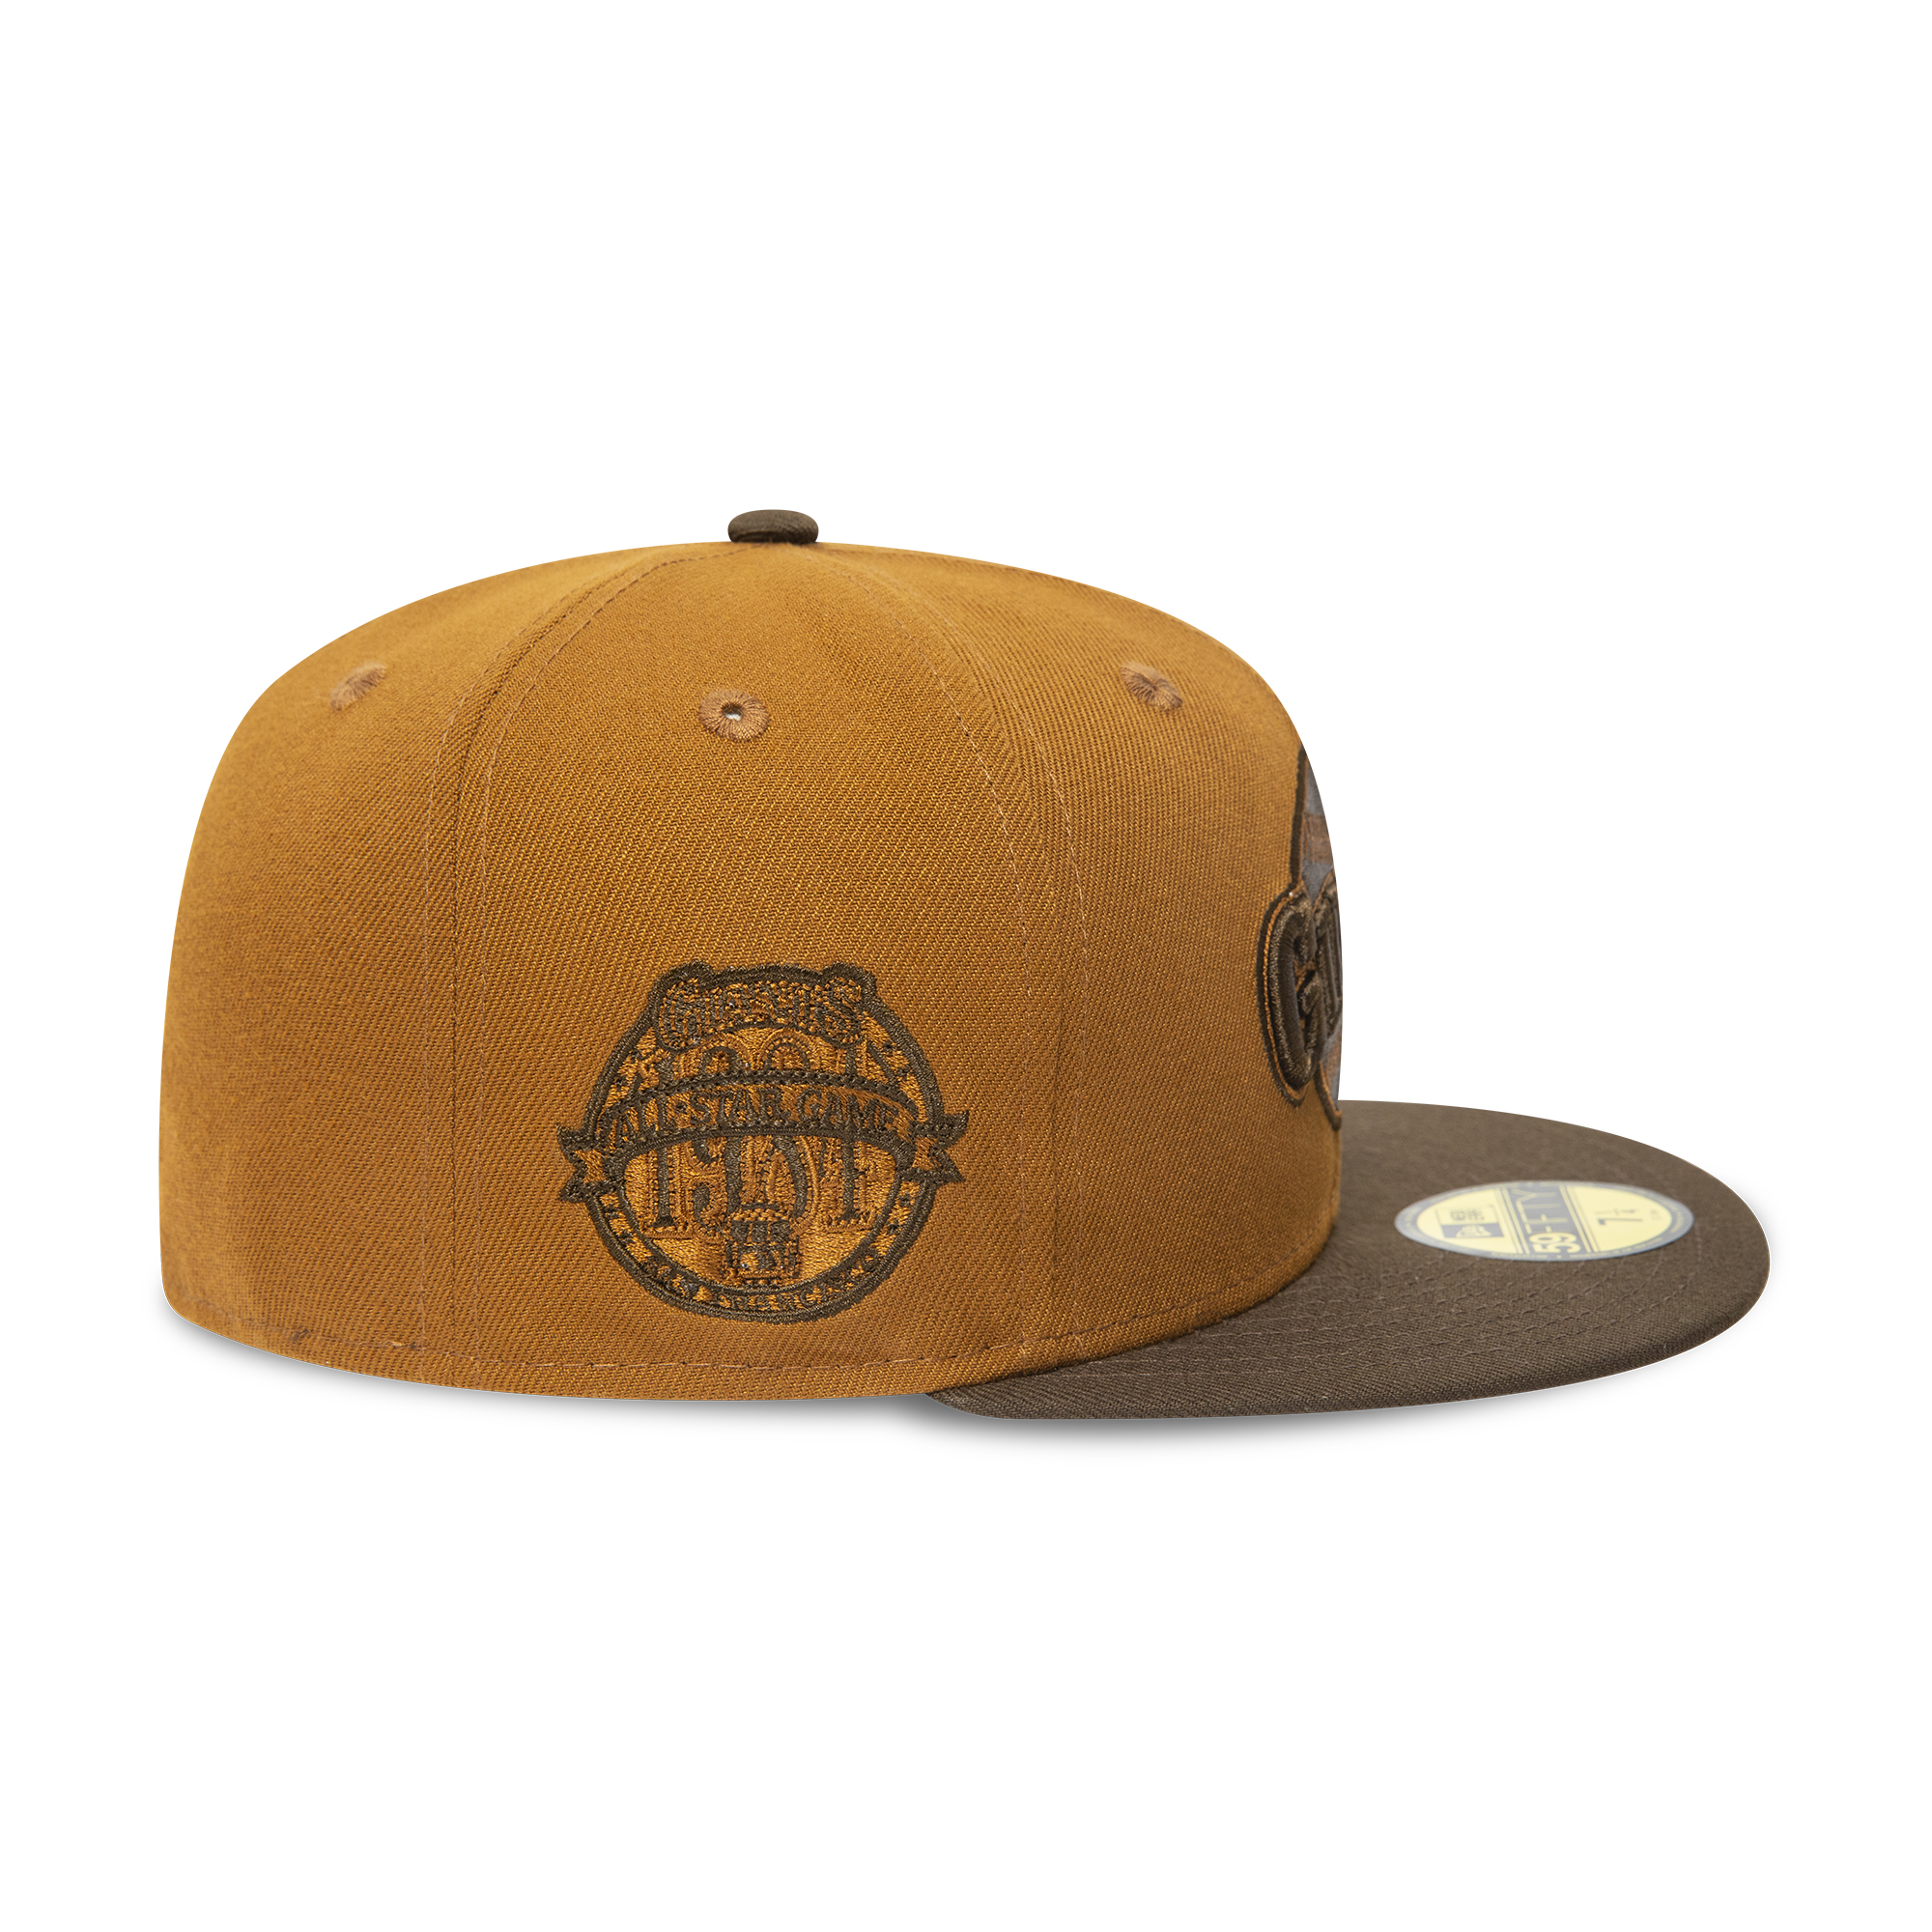 San Francisco Giants 1984 All Star Game Brown 59FIFTY Fitted Cap